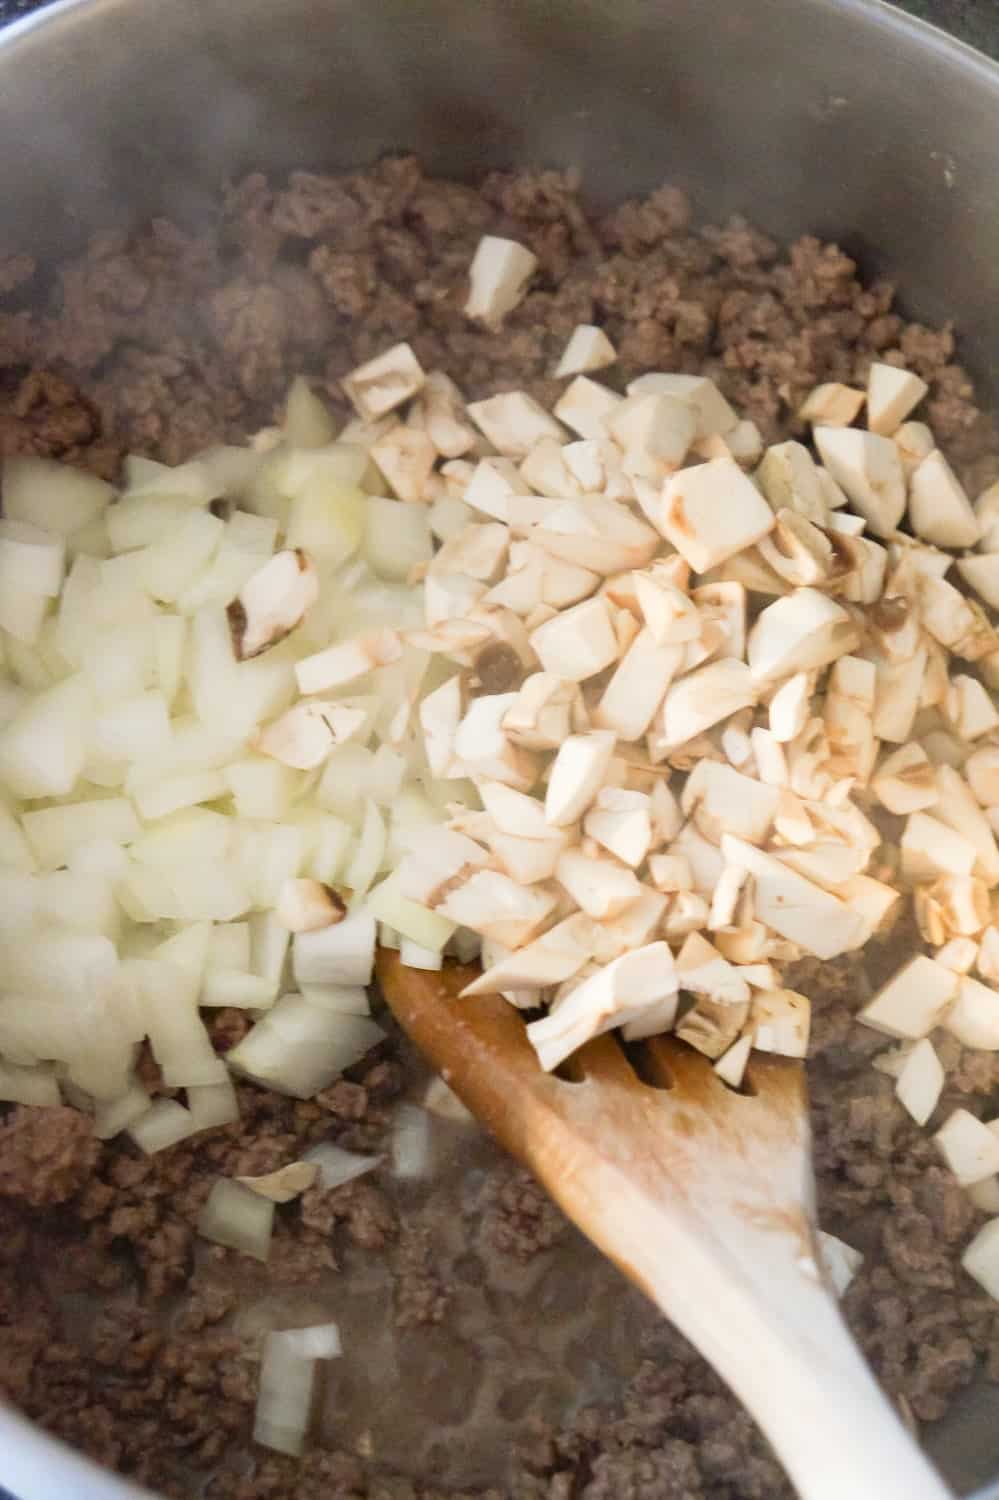 diced onions and diced mushrooms on top of cooked ground beef in a pot